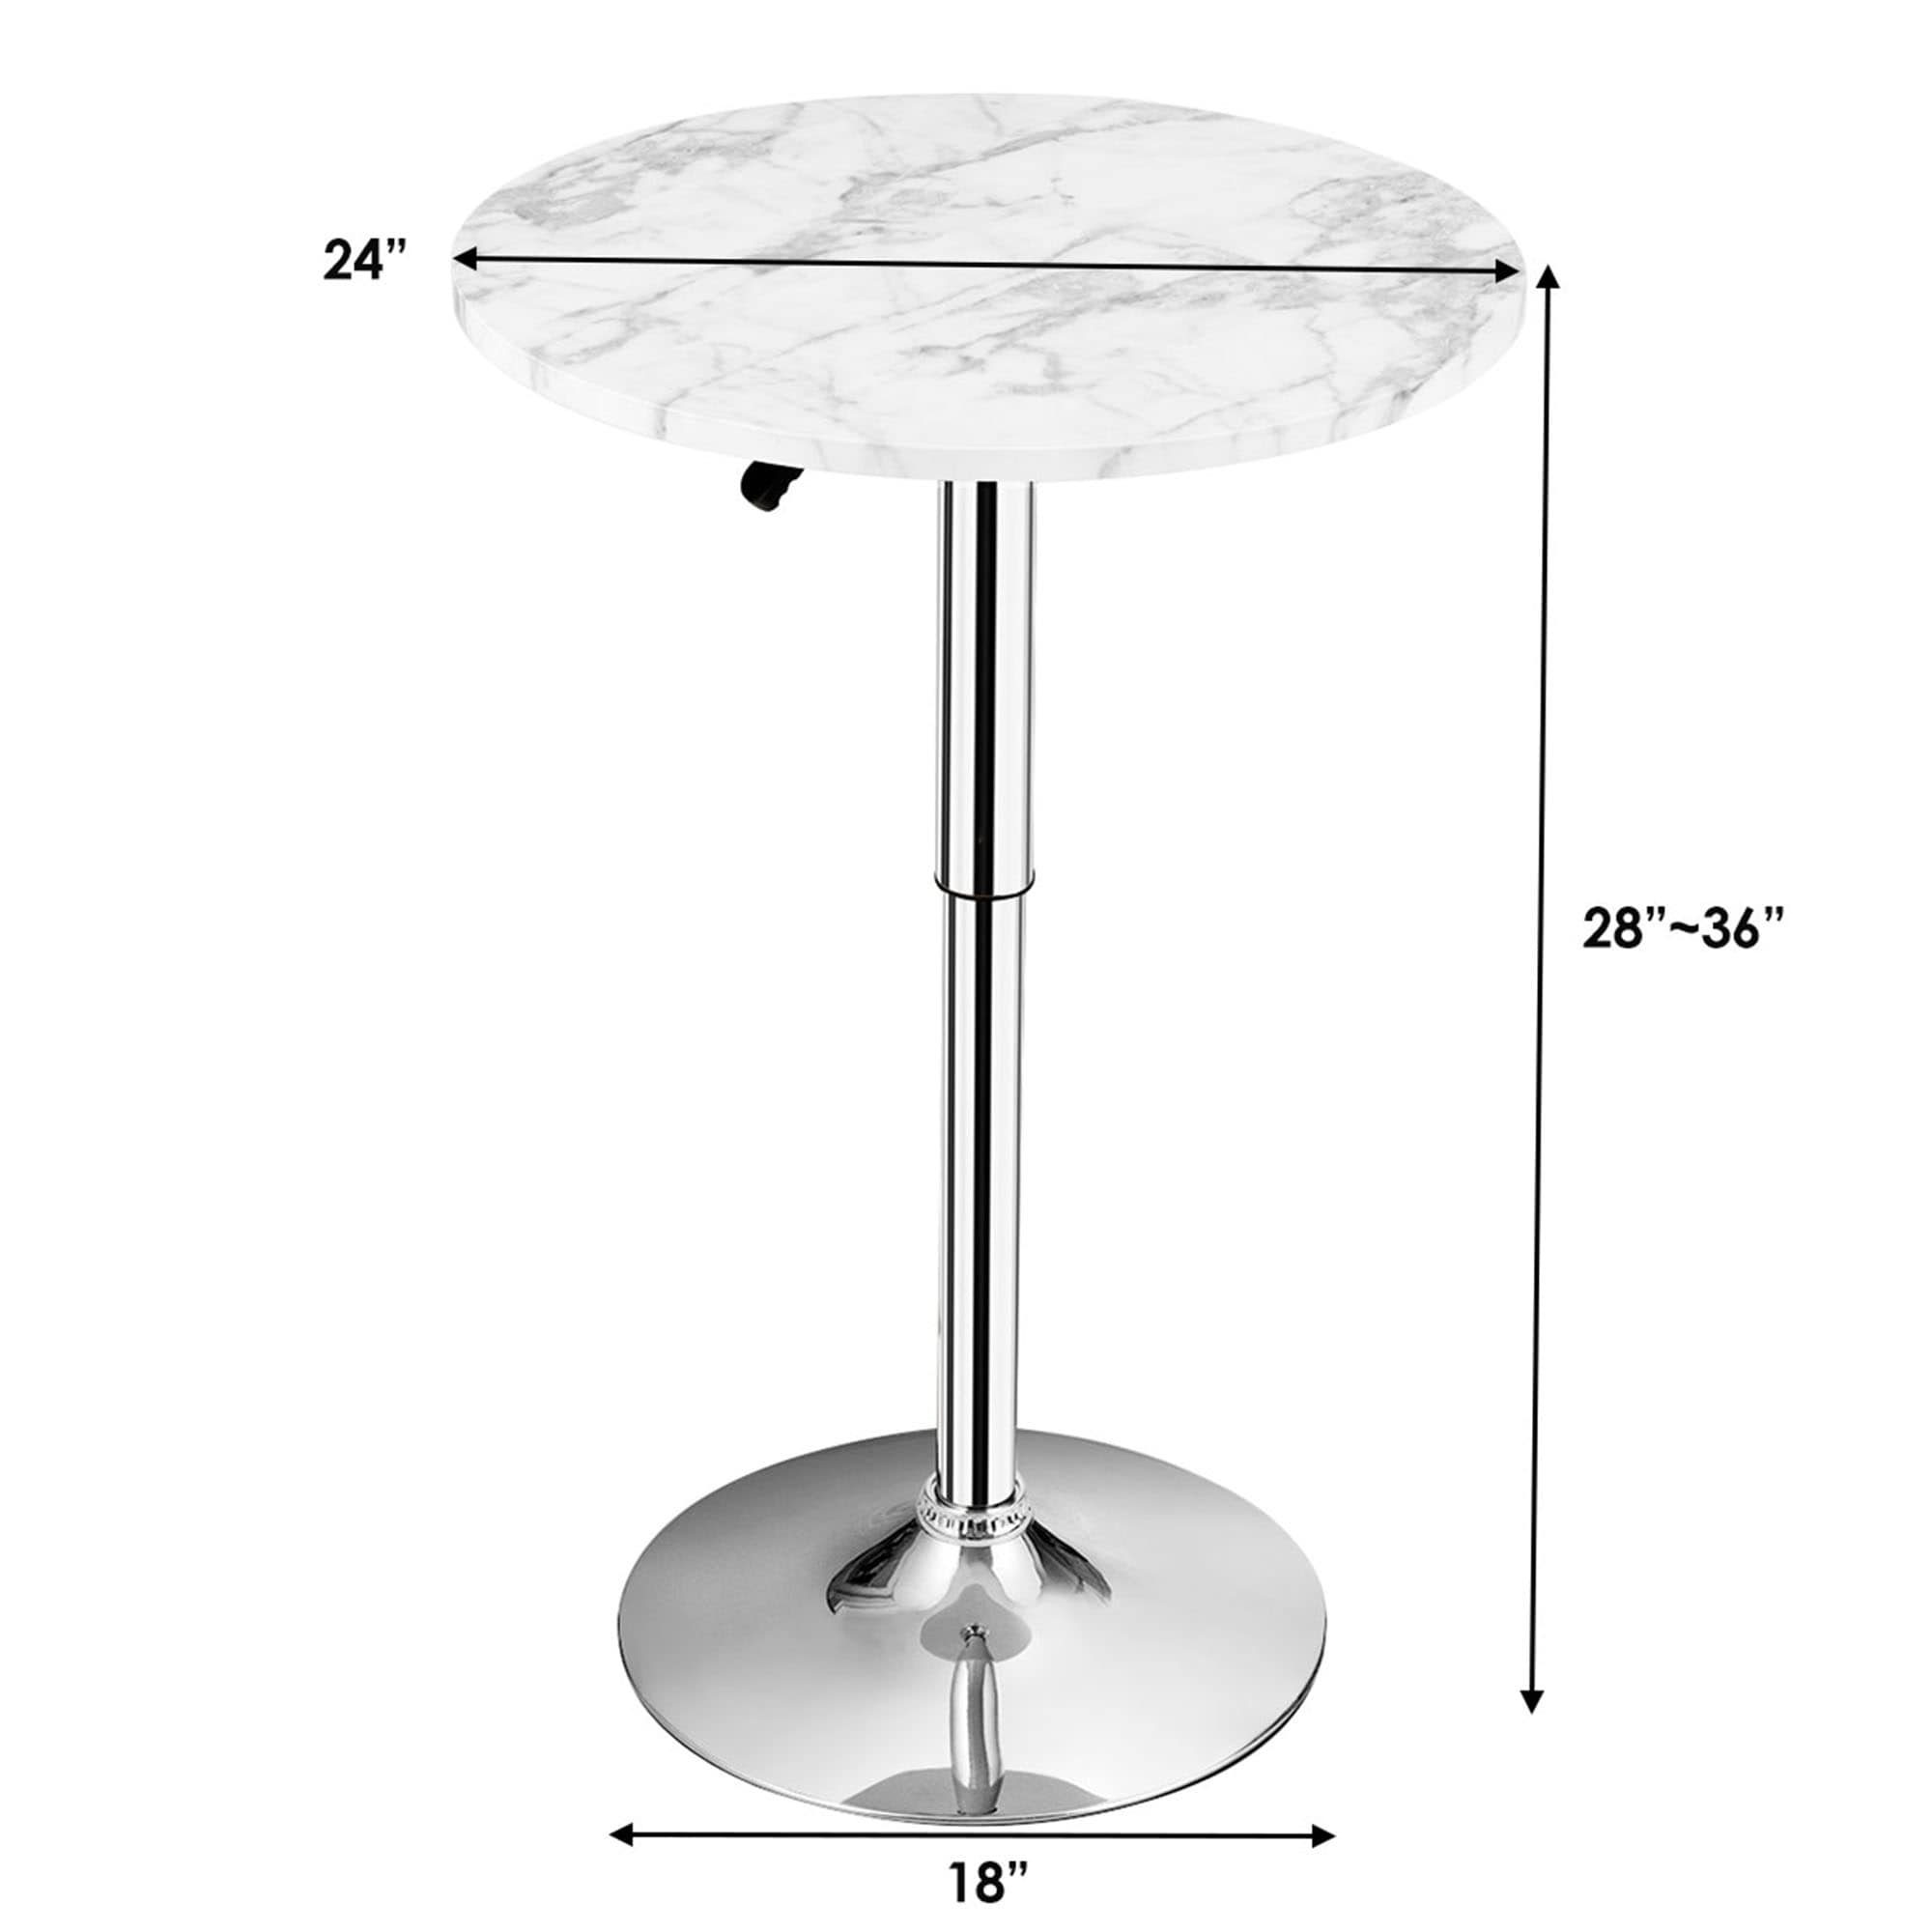 Living Room Furniture CJC Tables Adjustable Height Round Bristo Bar Pub Table 360 Swivel MDF Top 83-105 cm High Color : White, Size : 60X60X83-105CM